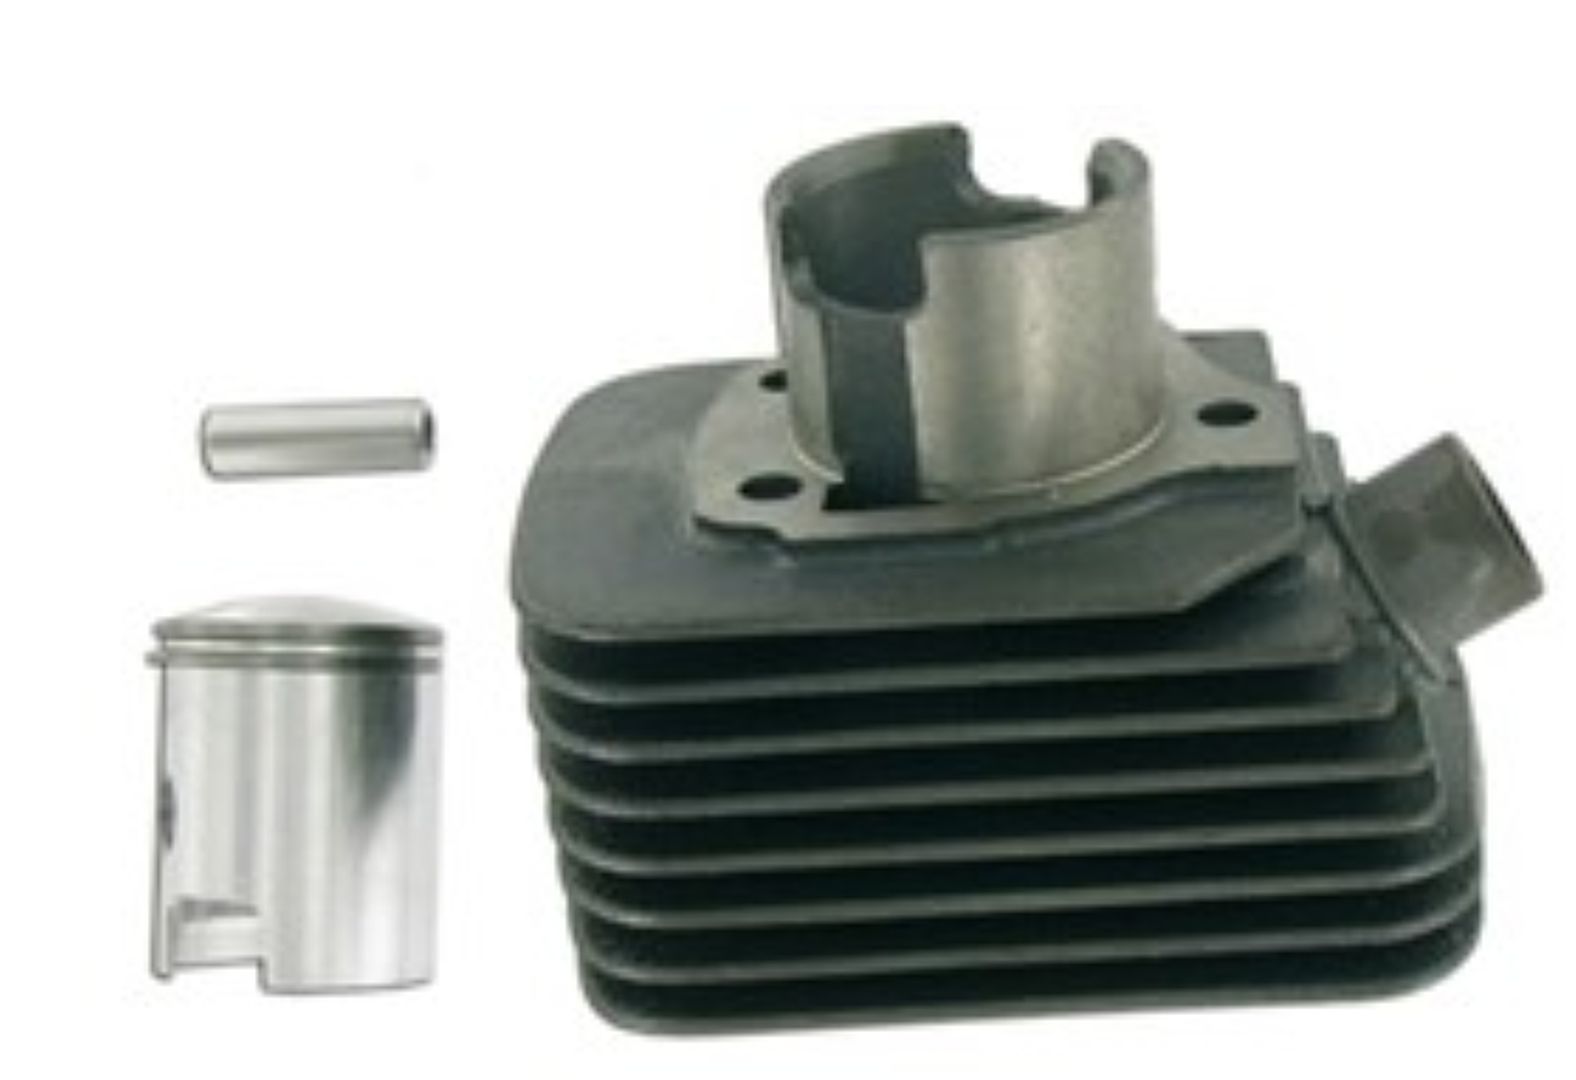 Piaggio cylindre avec piston complet 38.2 mm axe 10 mm pour Ciao SI